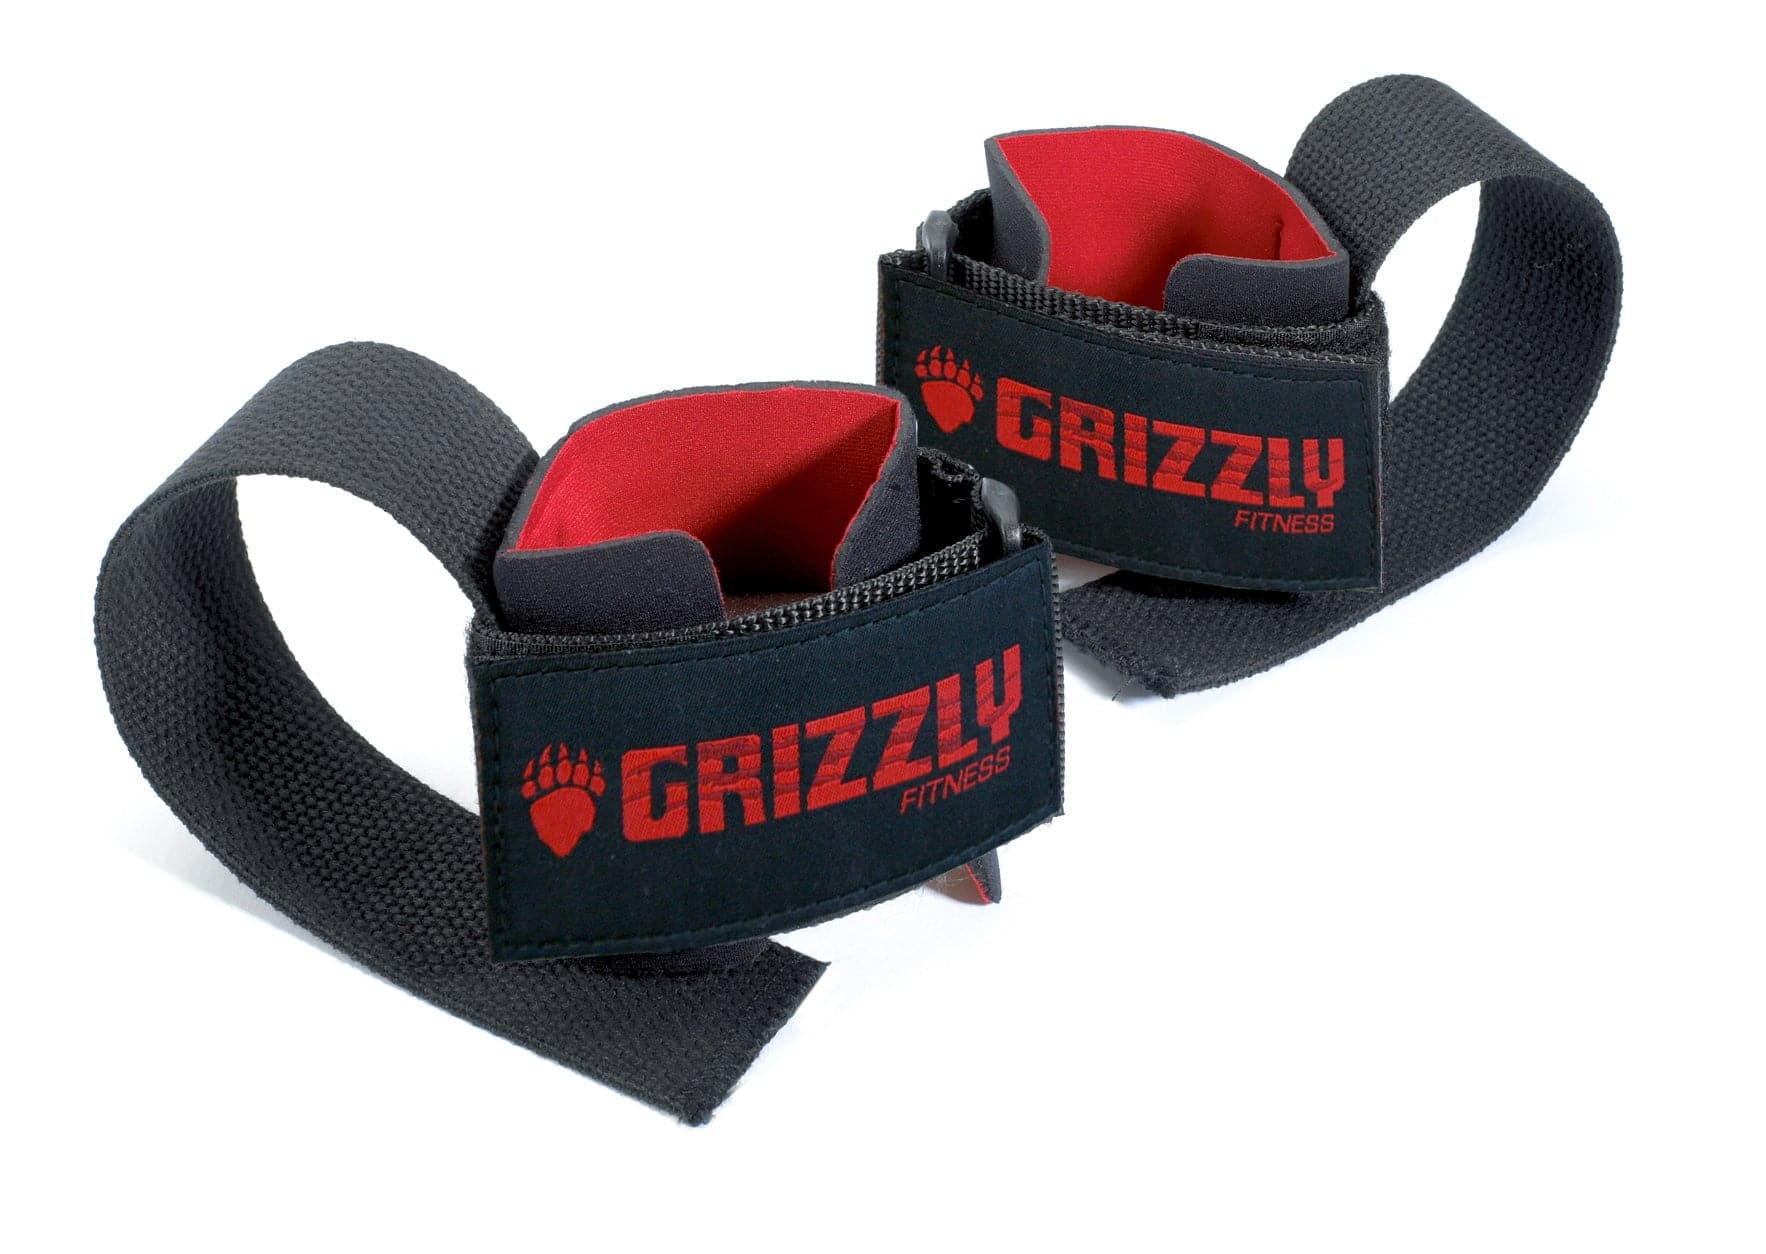 Grizzly Fitness Deluxe Weight Lifting Straps with Wrist Wraps for Men and Women (One Size Pair)